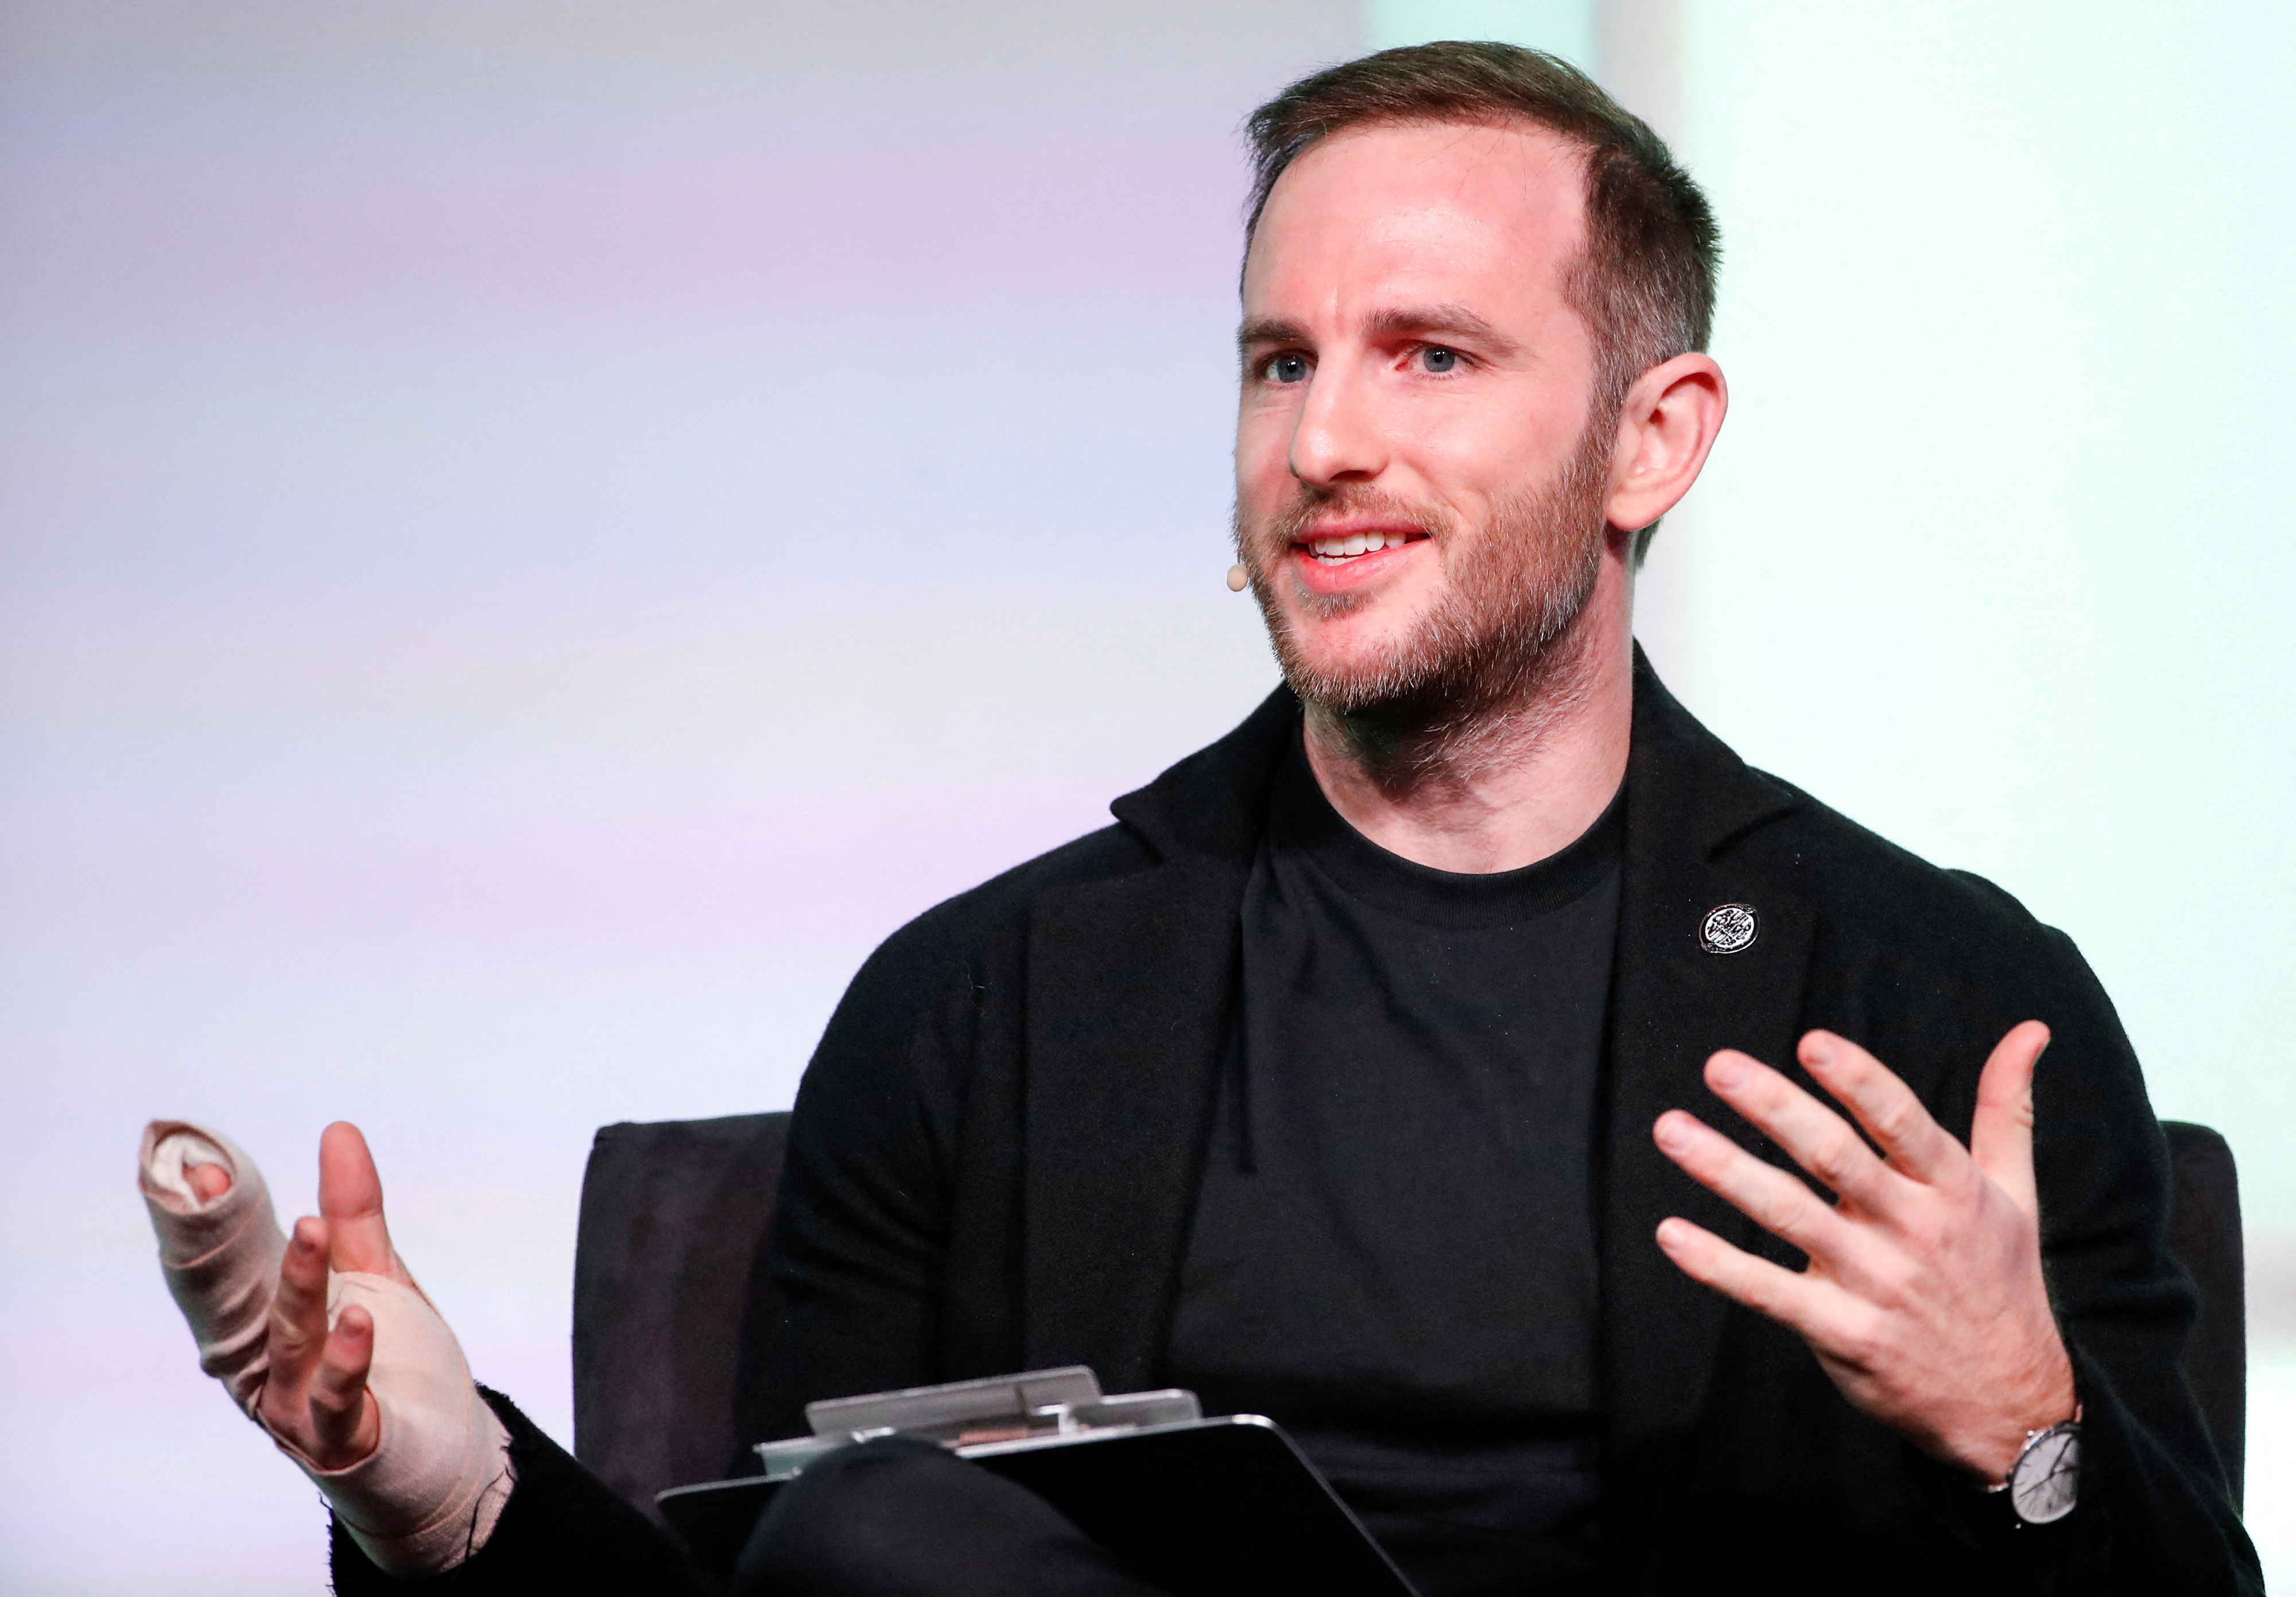 Joe Gebbia co-founder of Airbnb speaks during the first Obama Foundation Summit in Chicago